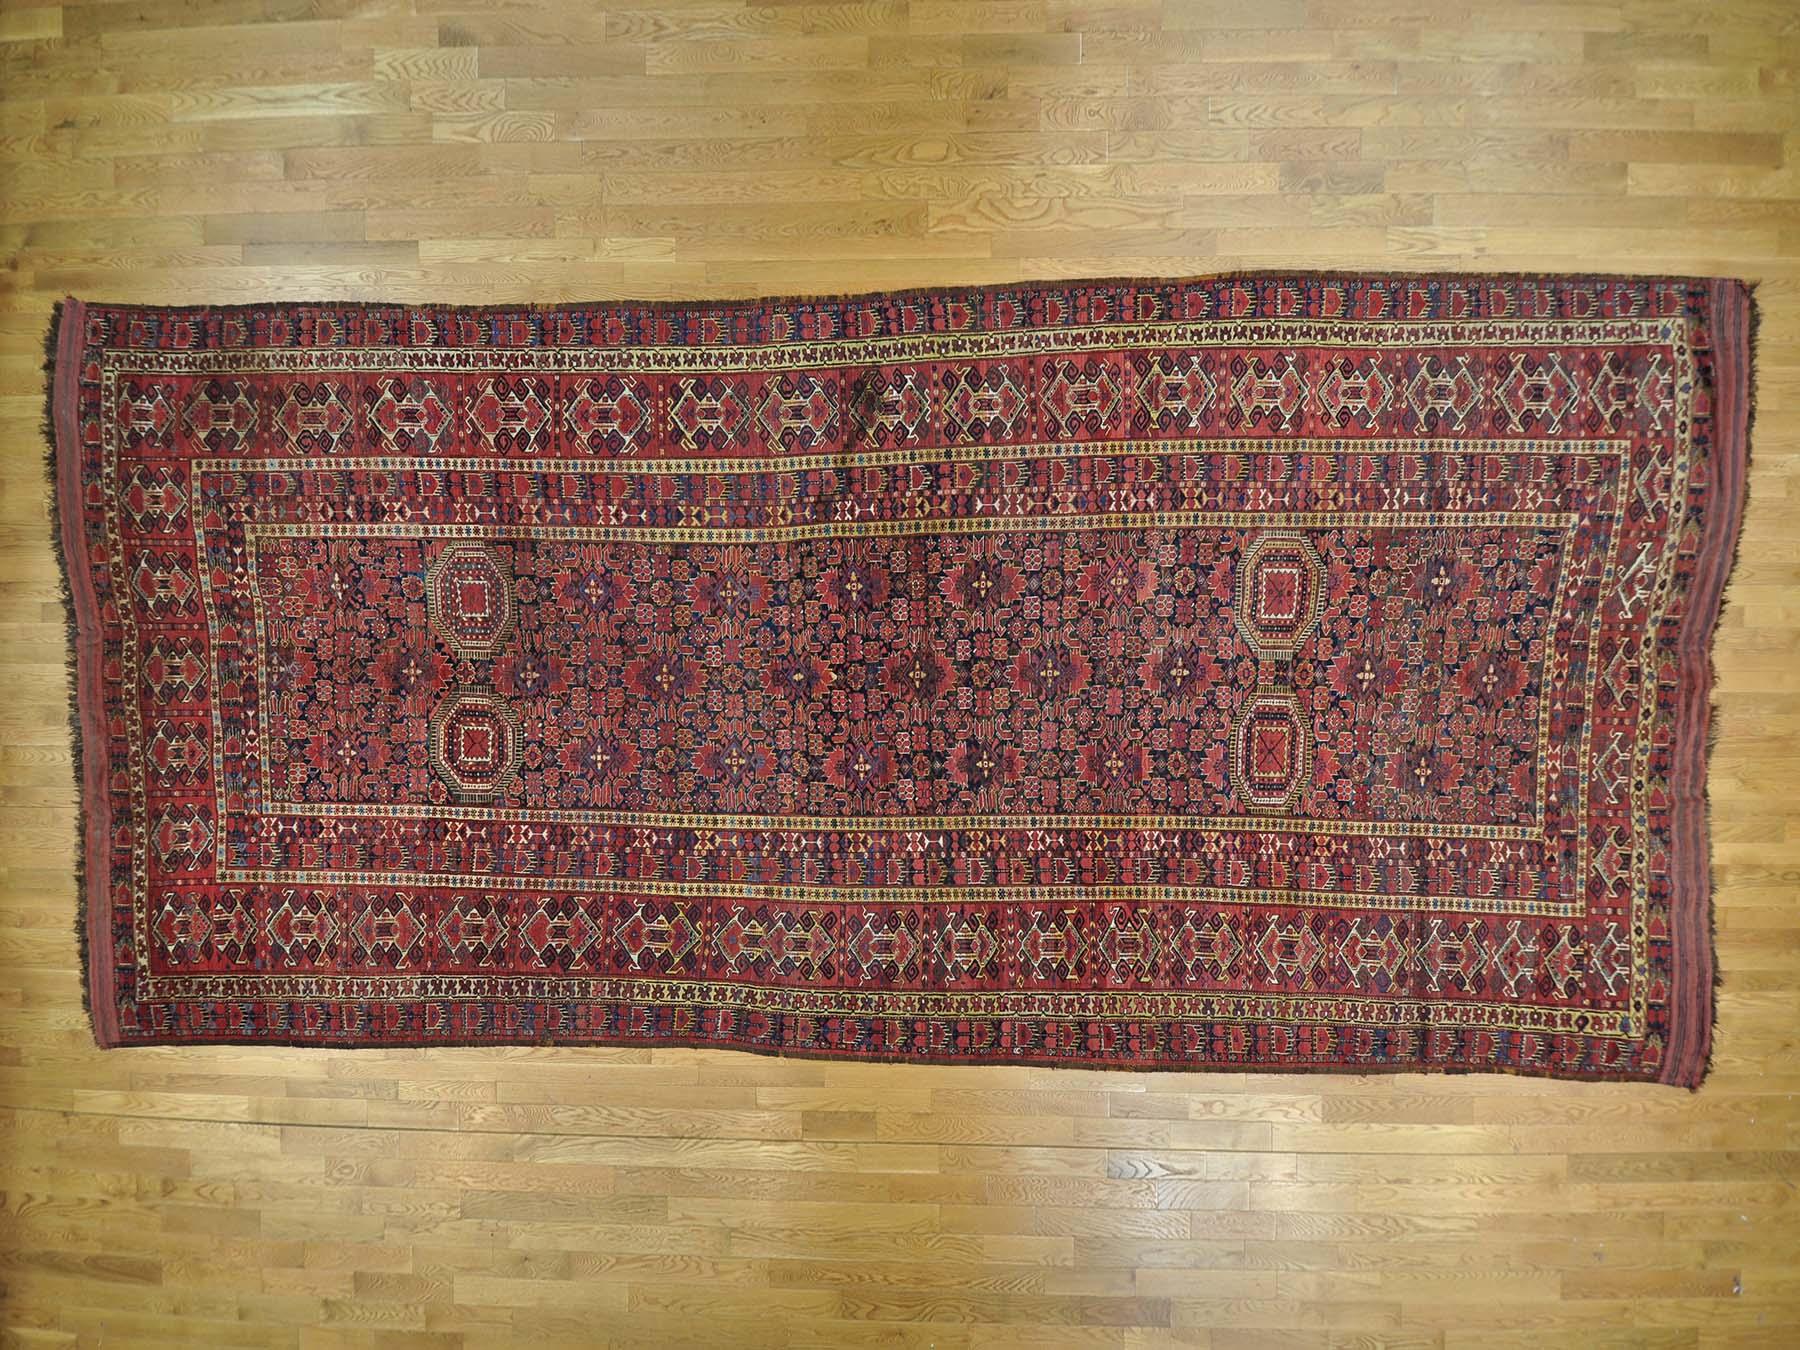 Enhance your home with this magnificent gallery size carpet. This handcrafted antique Afghan is an original beshir excellent condition pure wool oriental rug. This precise piece has been created for months and months in the centuries-old Persian